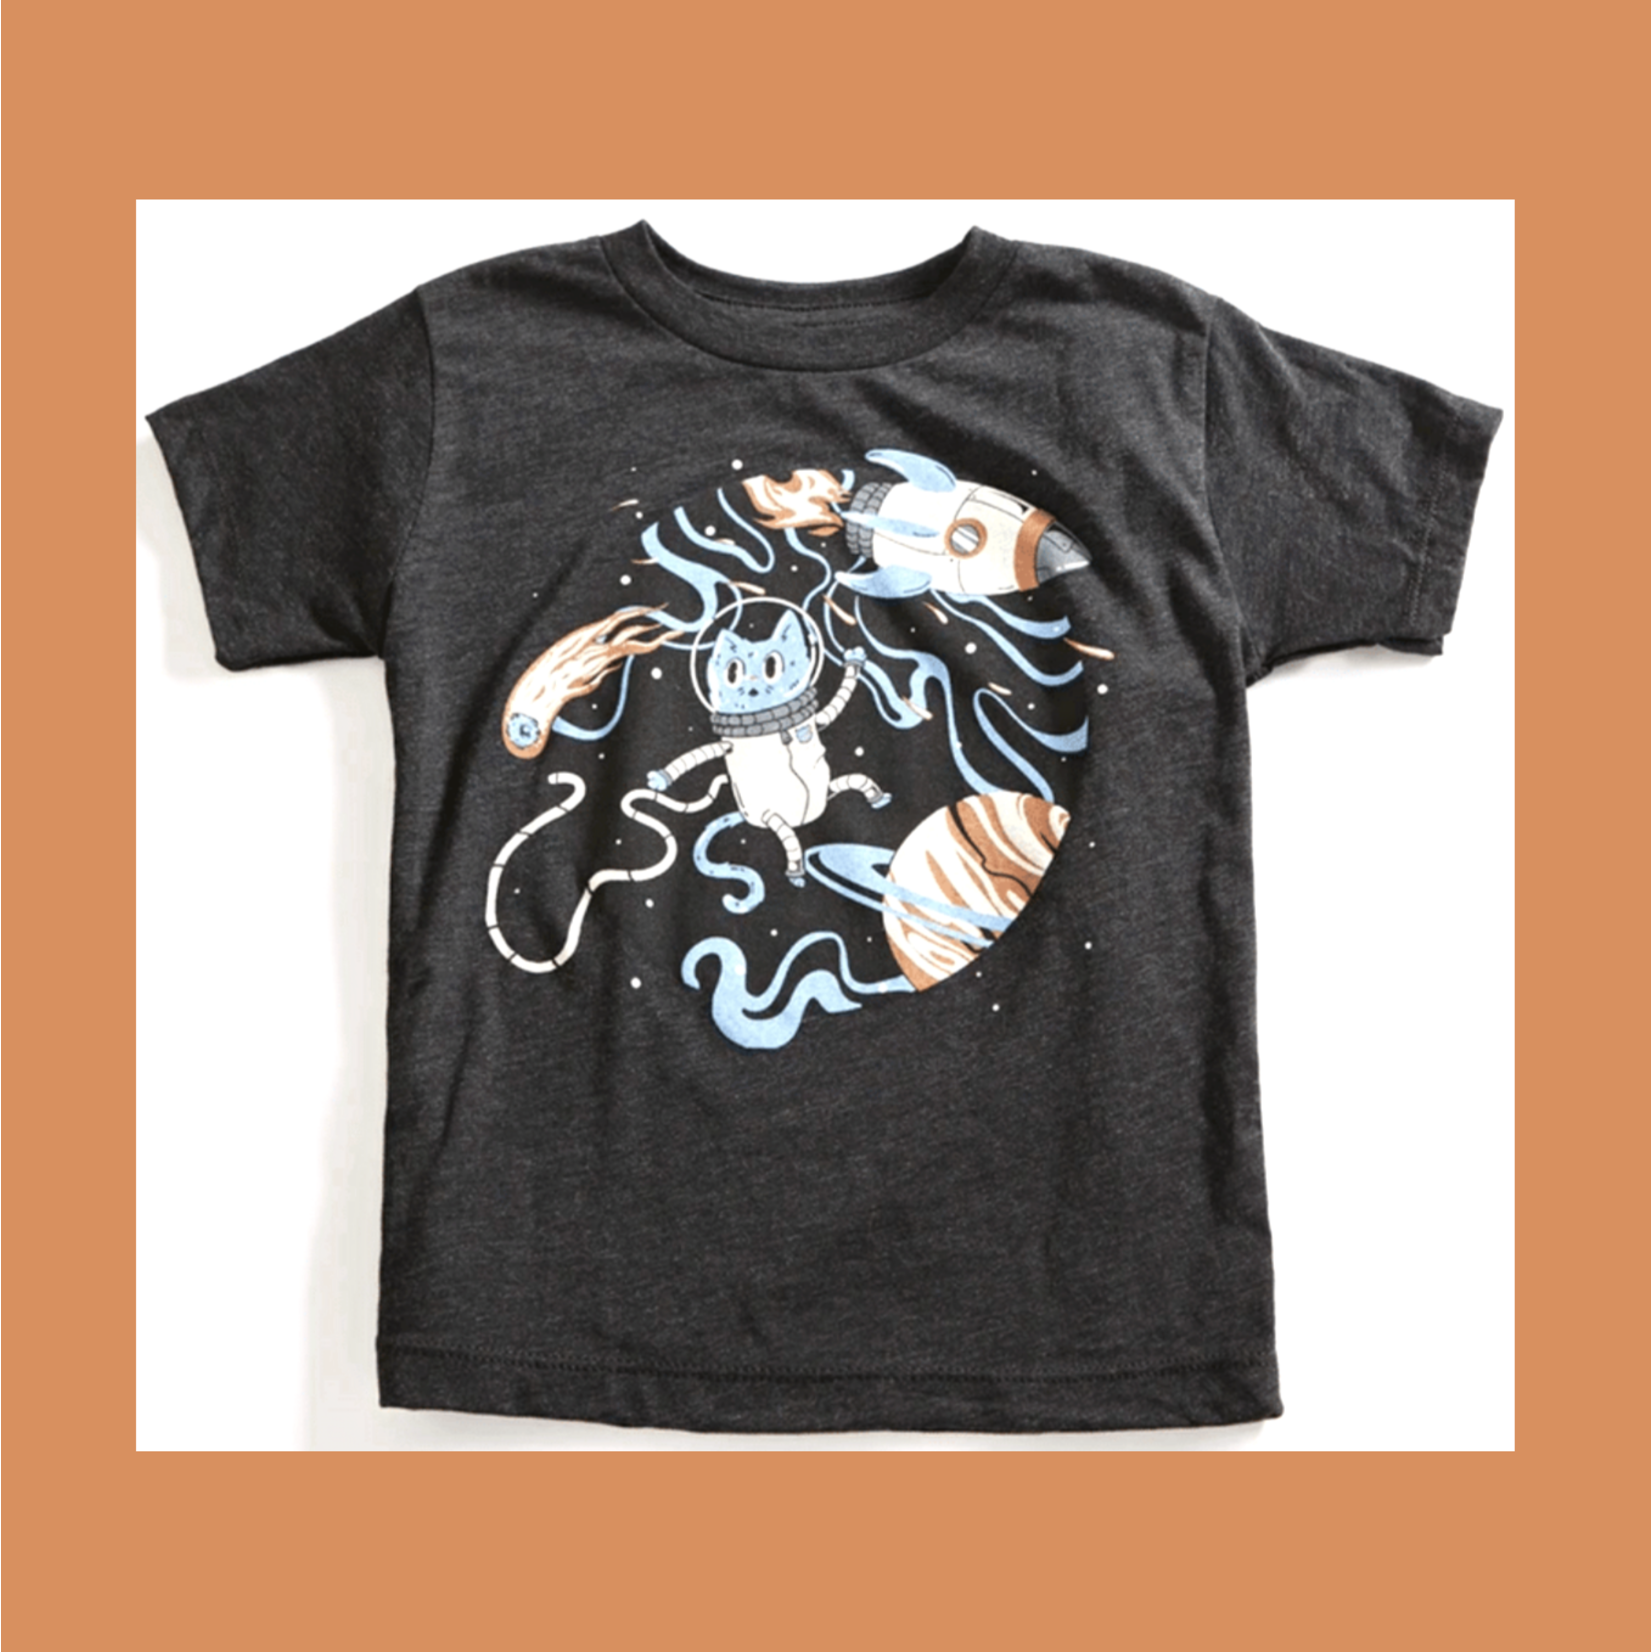 Orchard Street Apparel / Orchard Street Press Space Cat Heather Black Toddler + Youth Tee